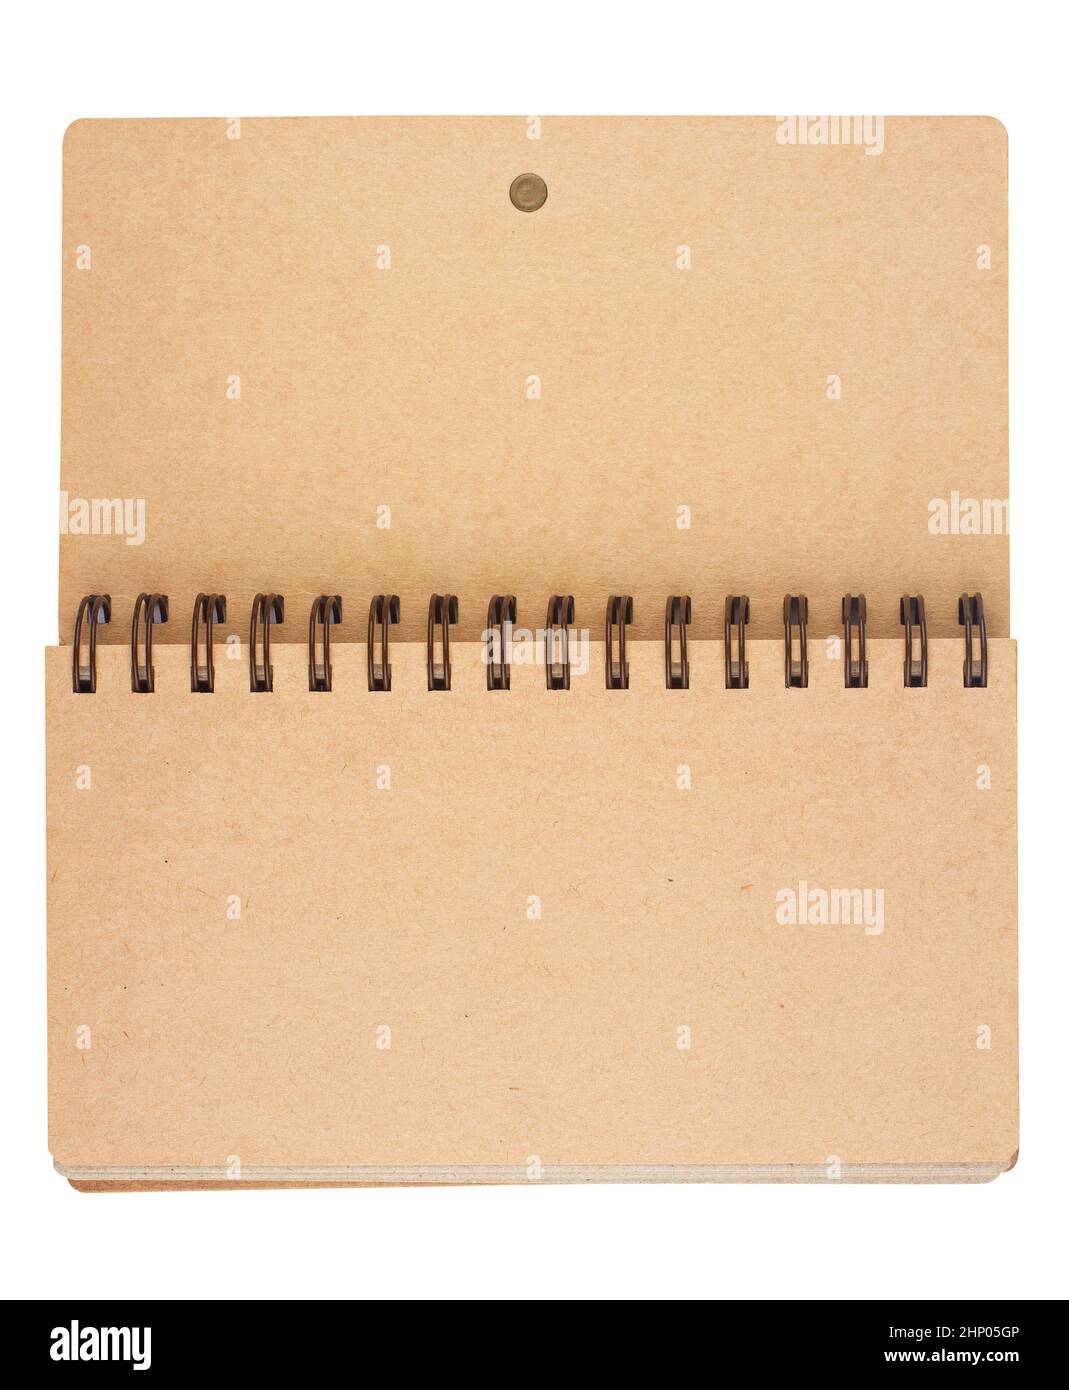 Blank parchment page o1 Spiral Notebook